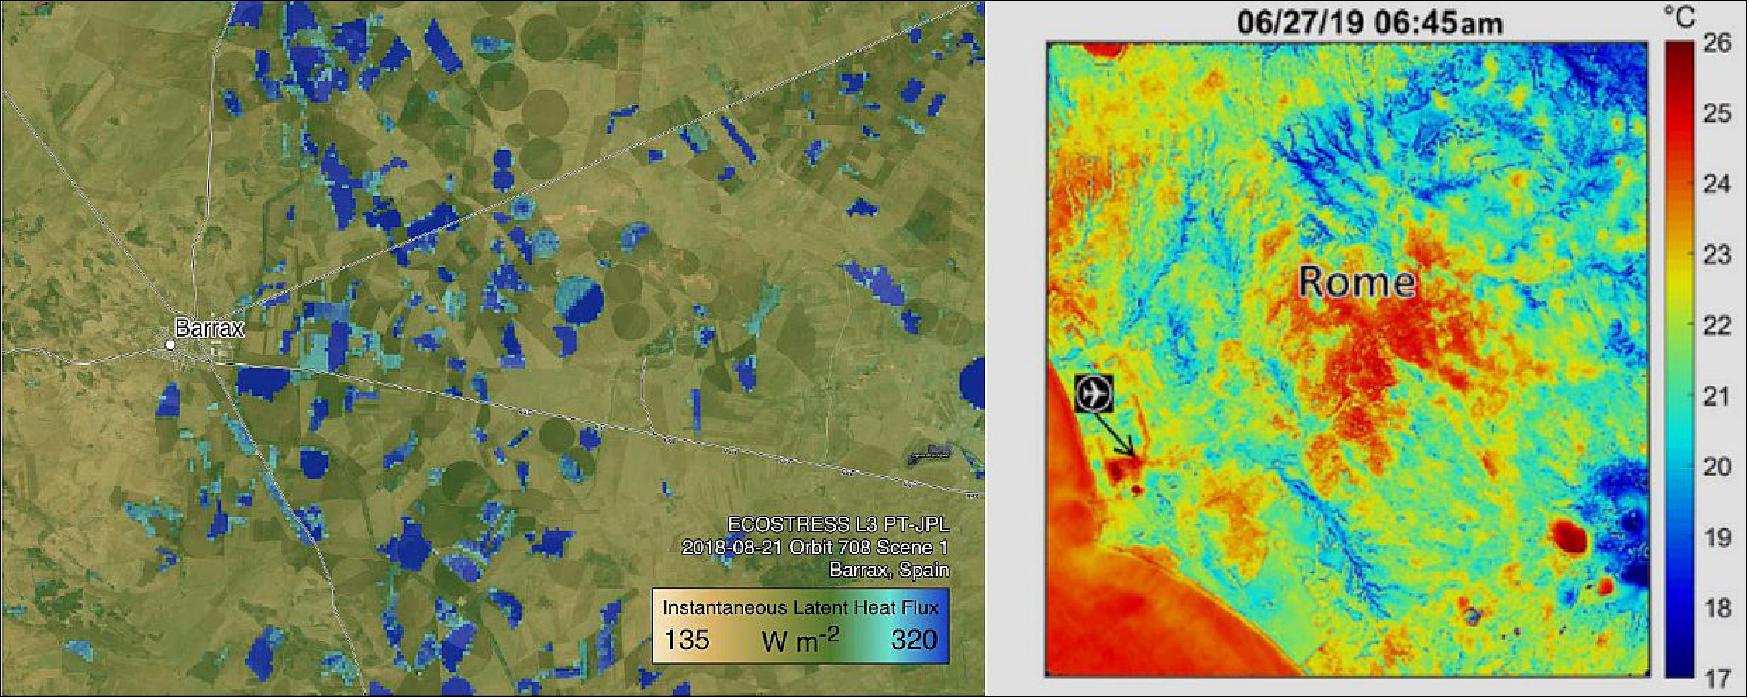 Figure 1: Images from JPL’s experimental ECOSTRESS mission, demonstrating future applications of the LSTM mission: latent heat flux from irrigated fields near Barrax, Spain in August 2018, and high urban surface temperatures in Rome, Italy during the heat wave of June 2019 (image credit: NASA/JPL)